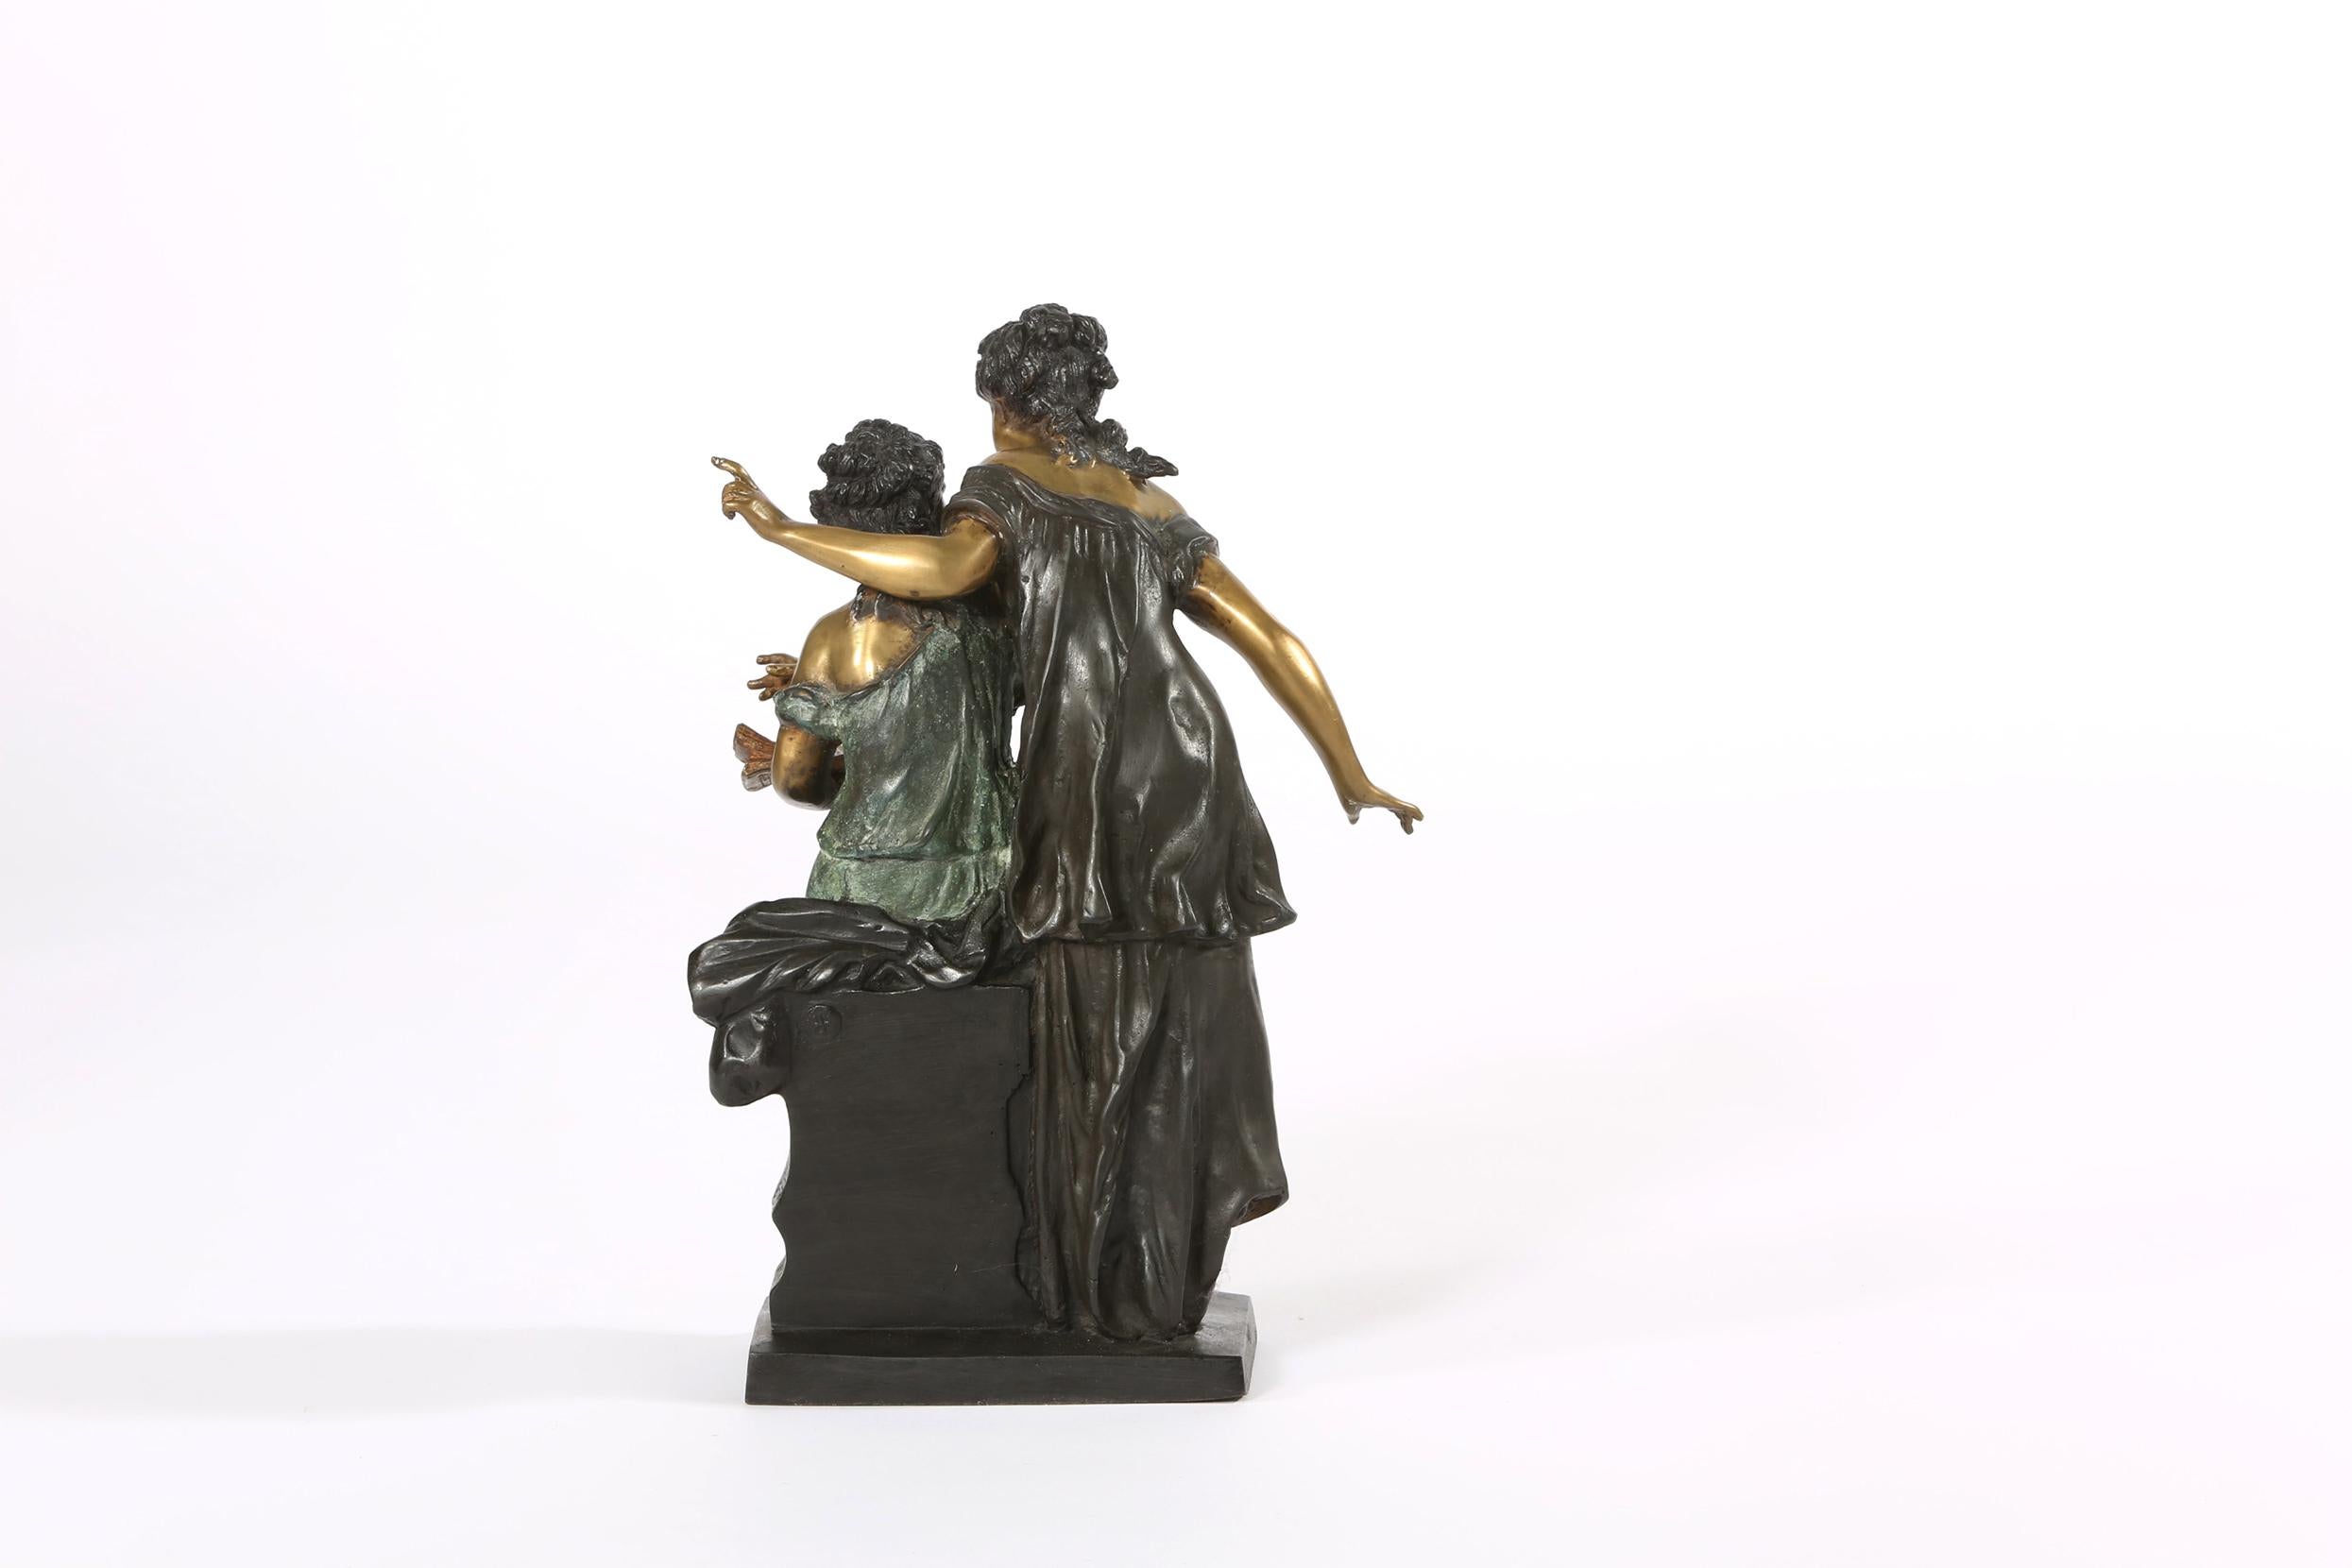 Mid-20th century decorative bronze sculpture of two female beauties. The sculpture is in good condition. Undersigned by the artist Agiest Moraell (C) 182. The decorative piece stand about 15 inches tall. Base is 7.5 inches x 6.5 inches.